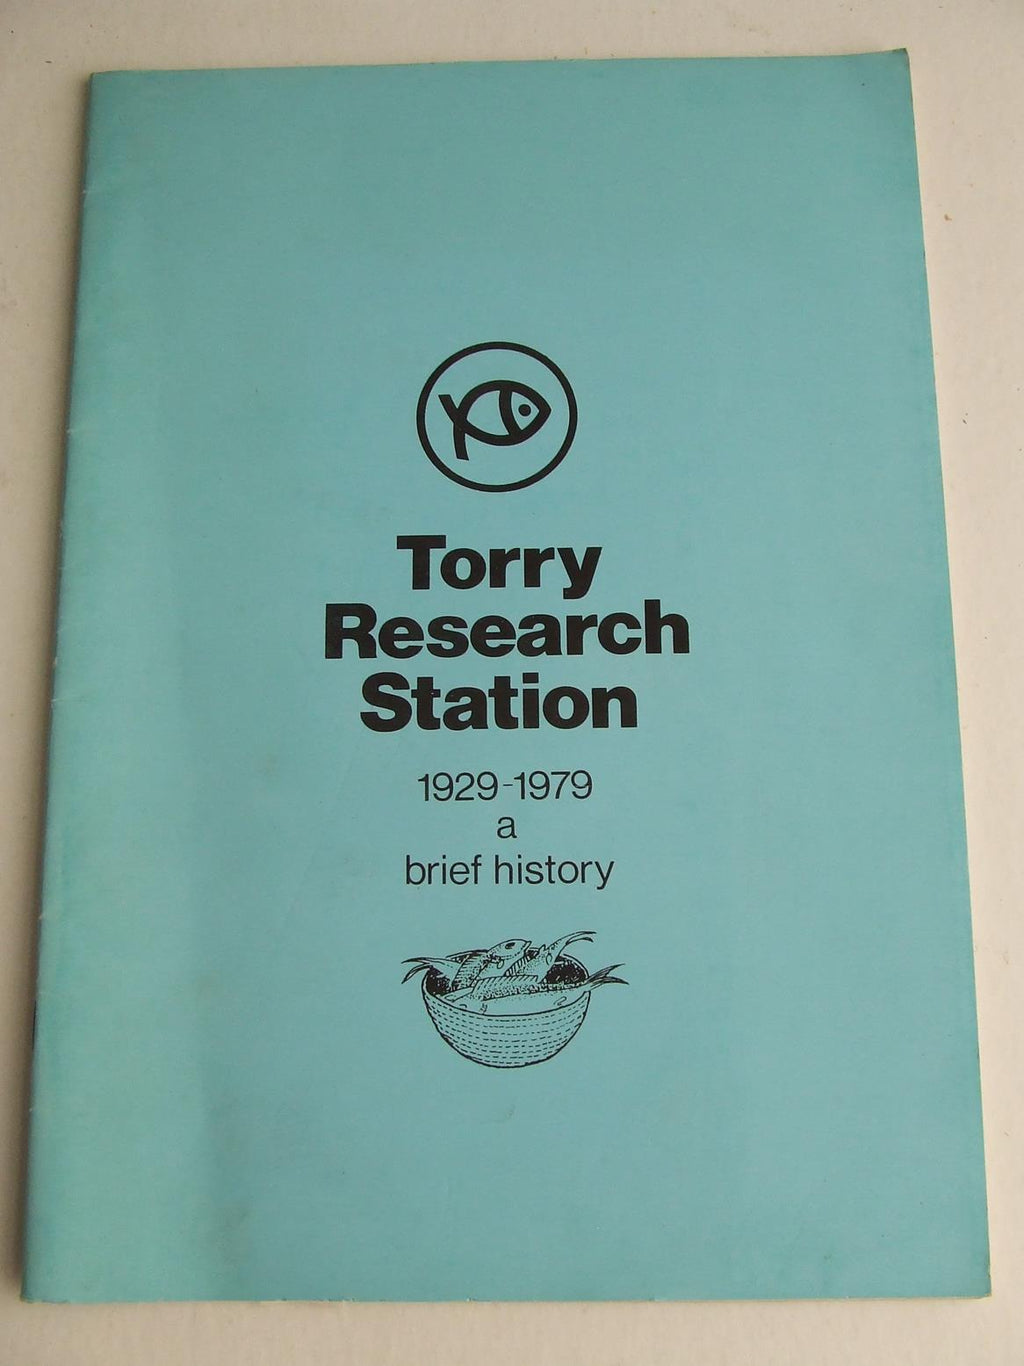 TORRY RESEARCH STATION 1929-1979, a brief history